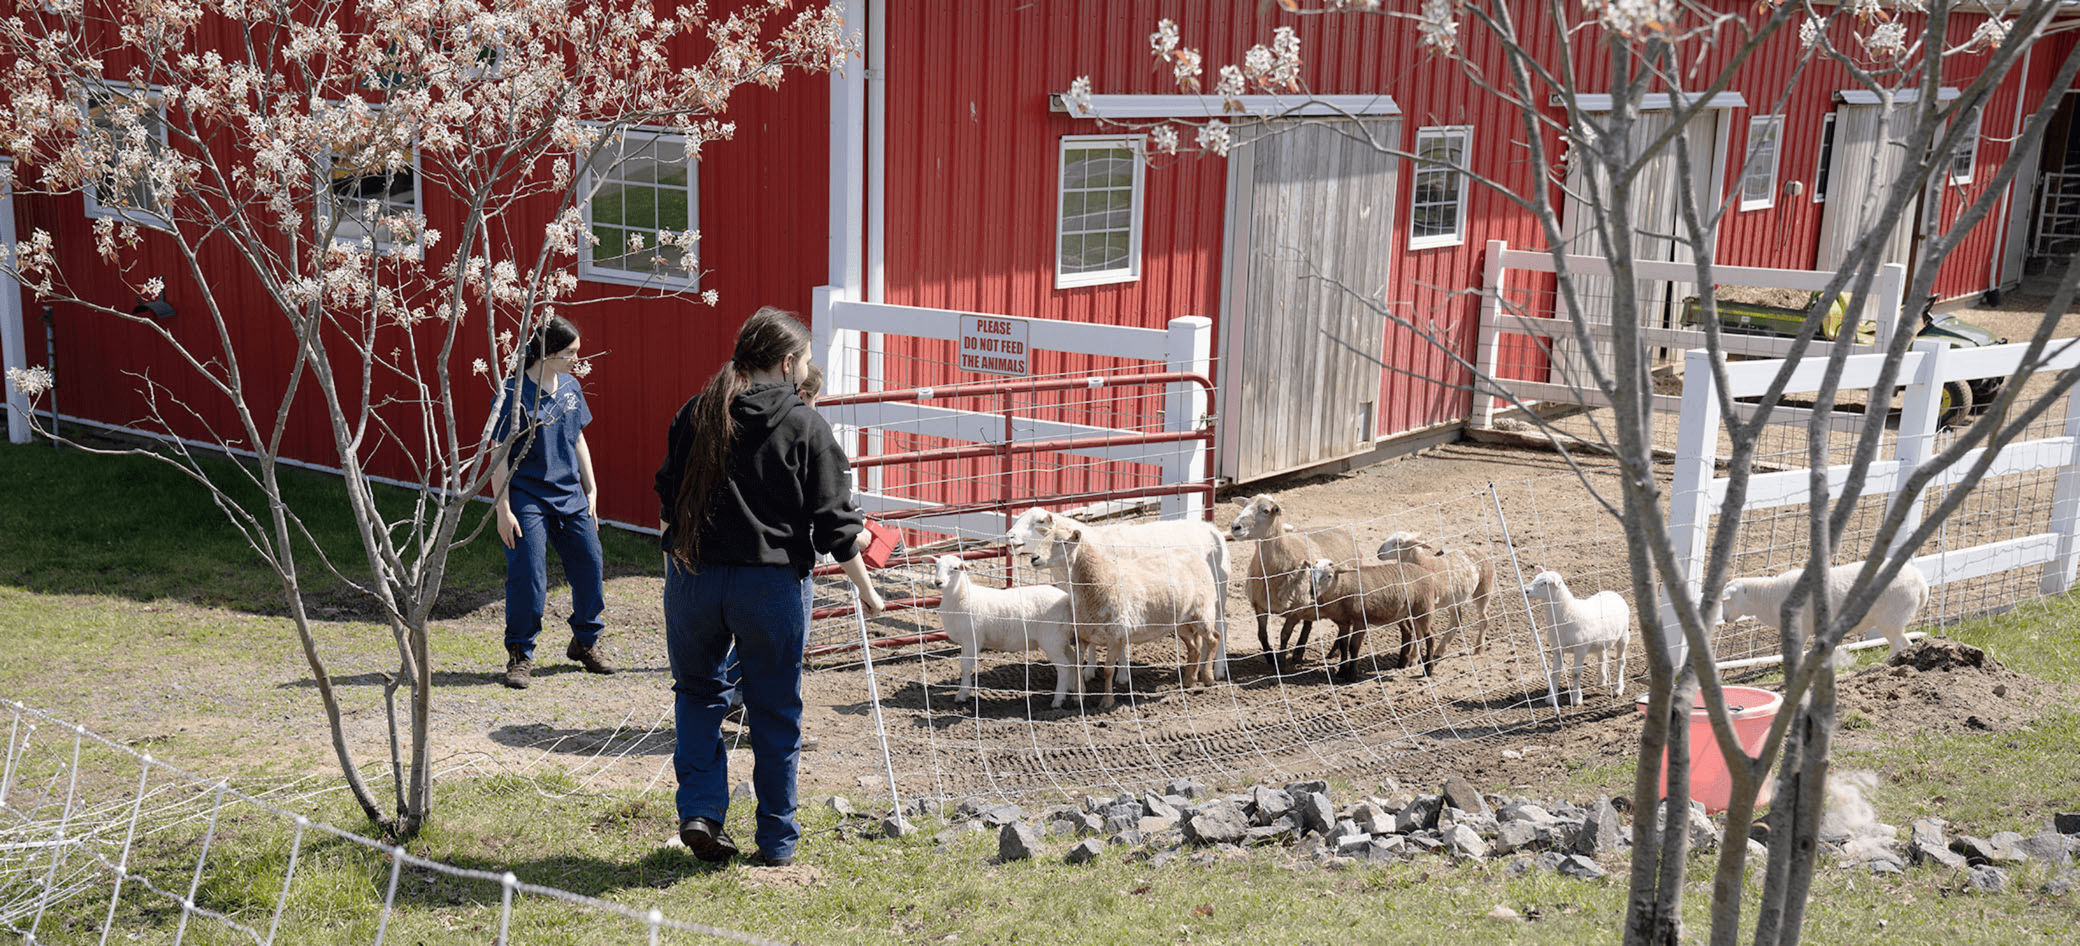 Three students release a group of excited sheep from a pen.